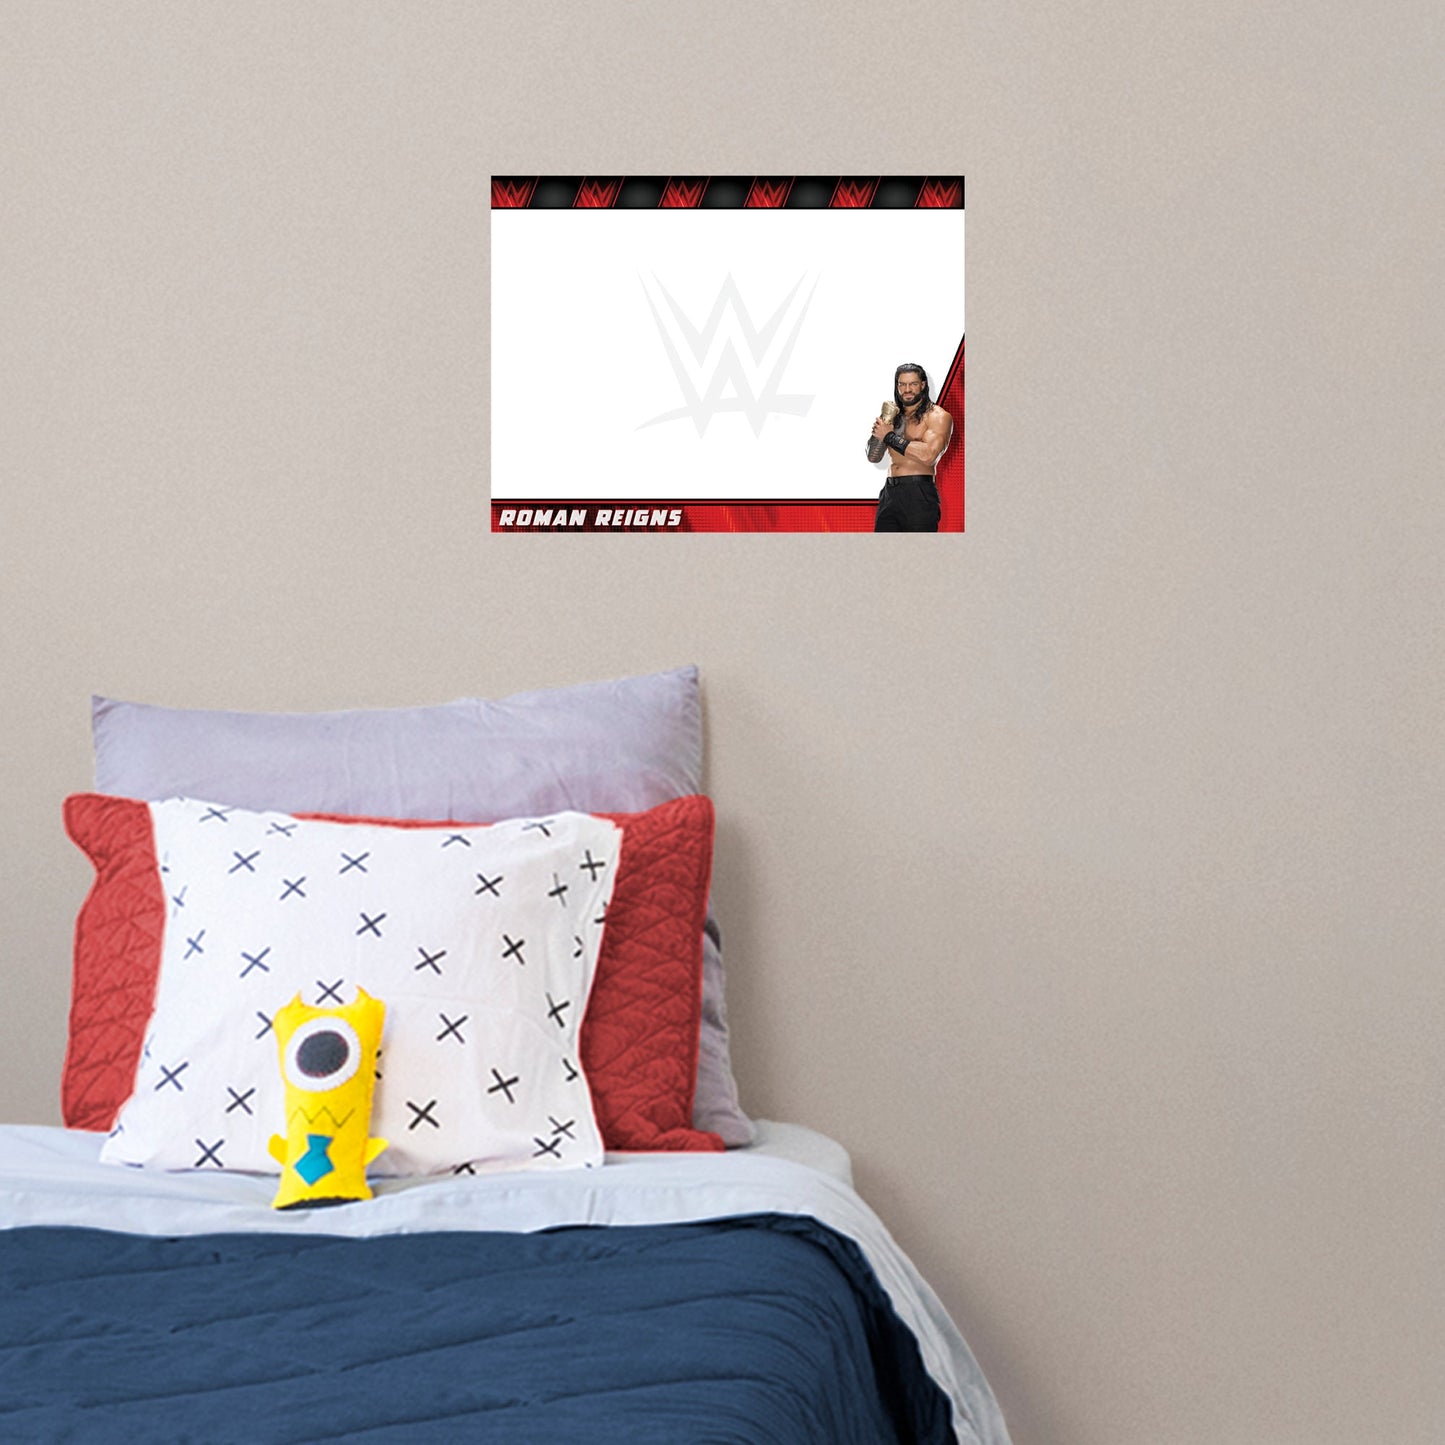 Roman Reigns Dry Erase Whiteboard - Officially Licensed WWE Removable Adhesive Decal